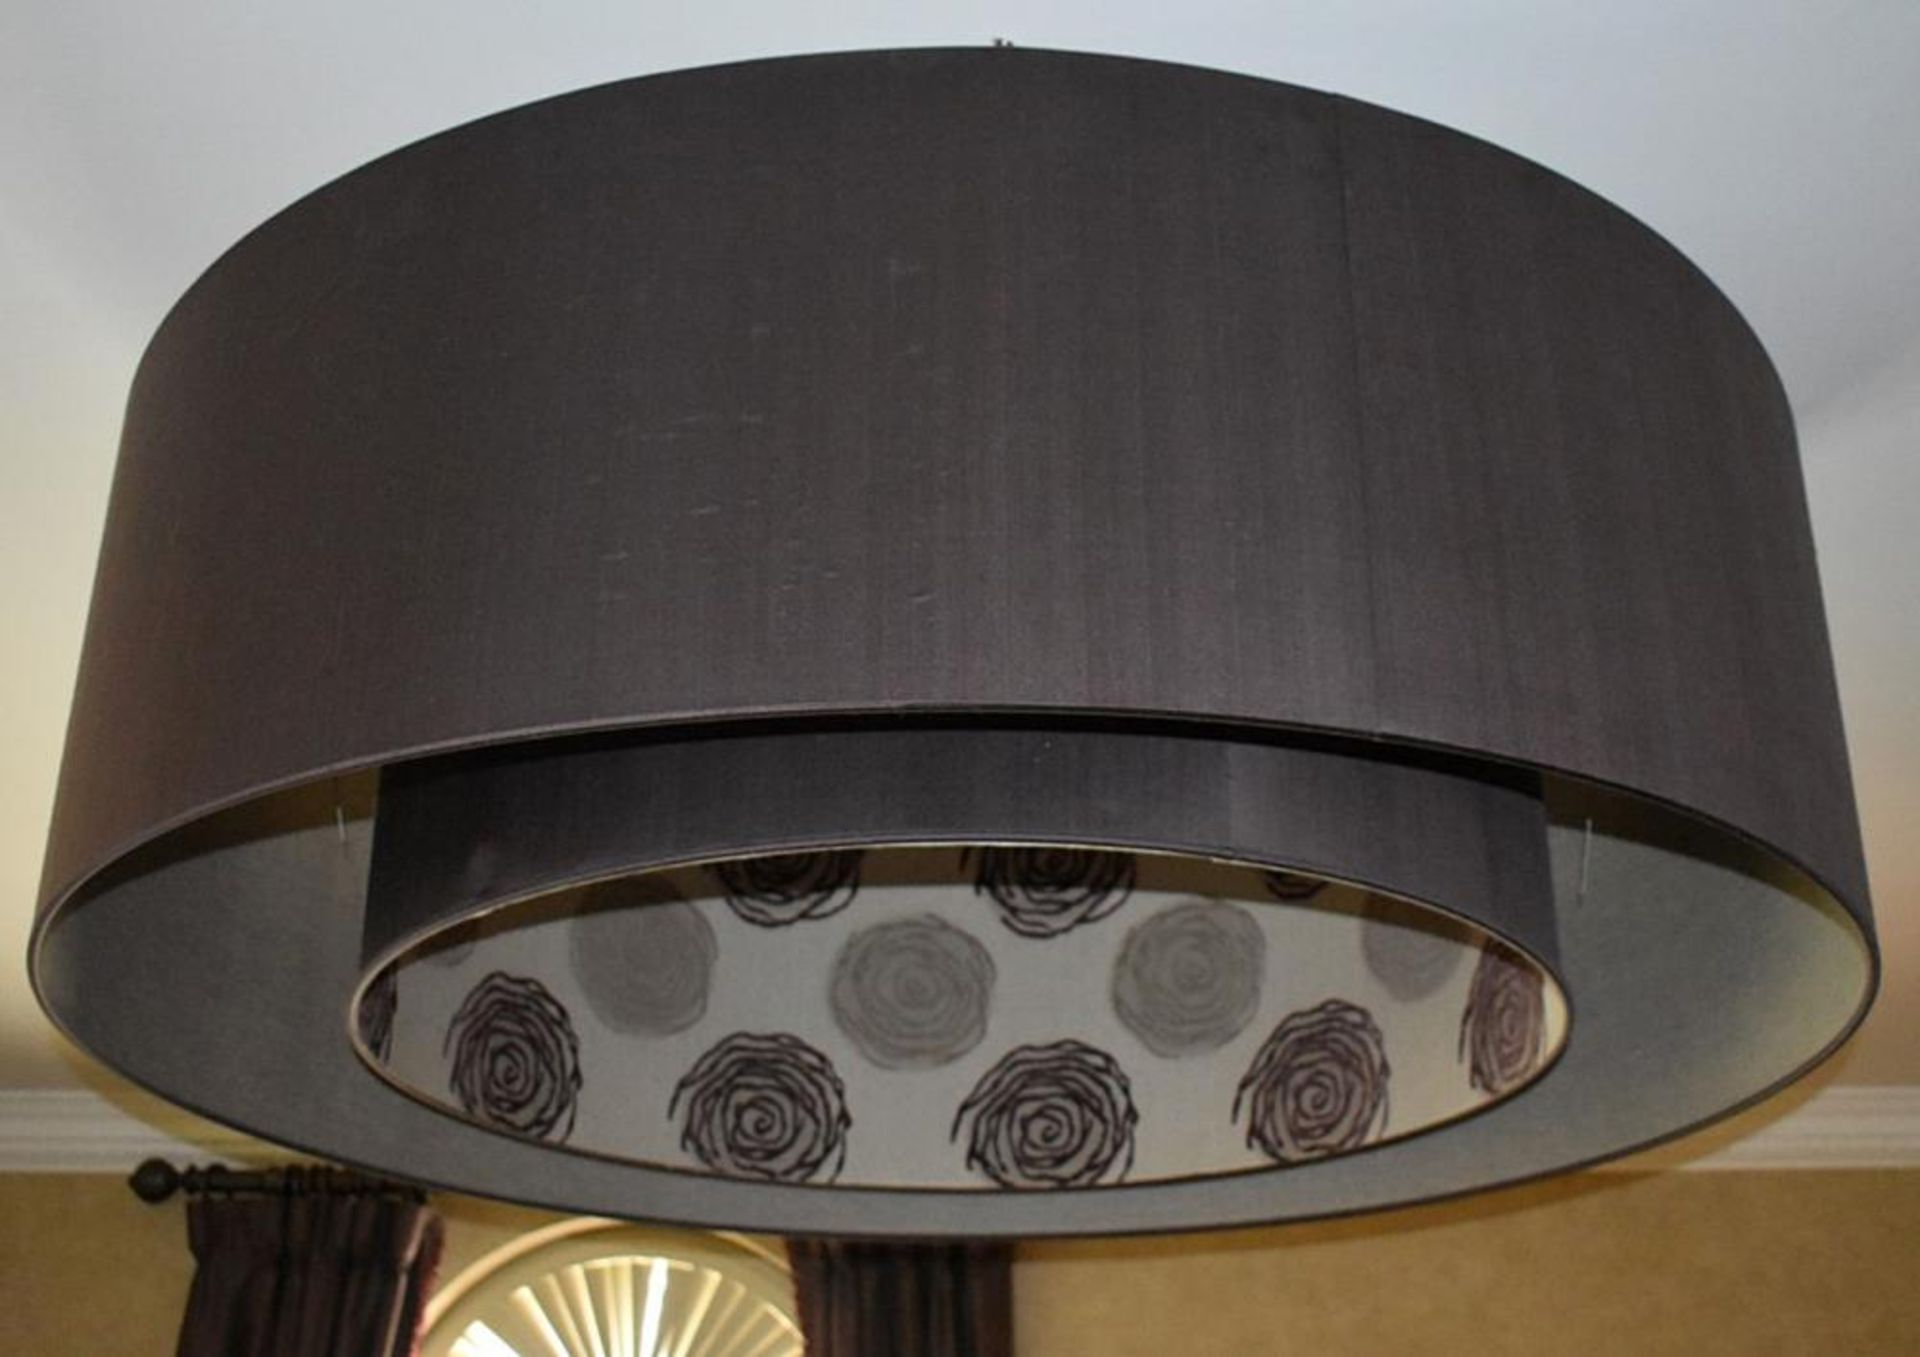 1 x Huge 1.5 Metre Light Fitting Featuring A Double Shade - Dimensions: 150cm Diamter, 50cm Height - Image 2 of 7